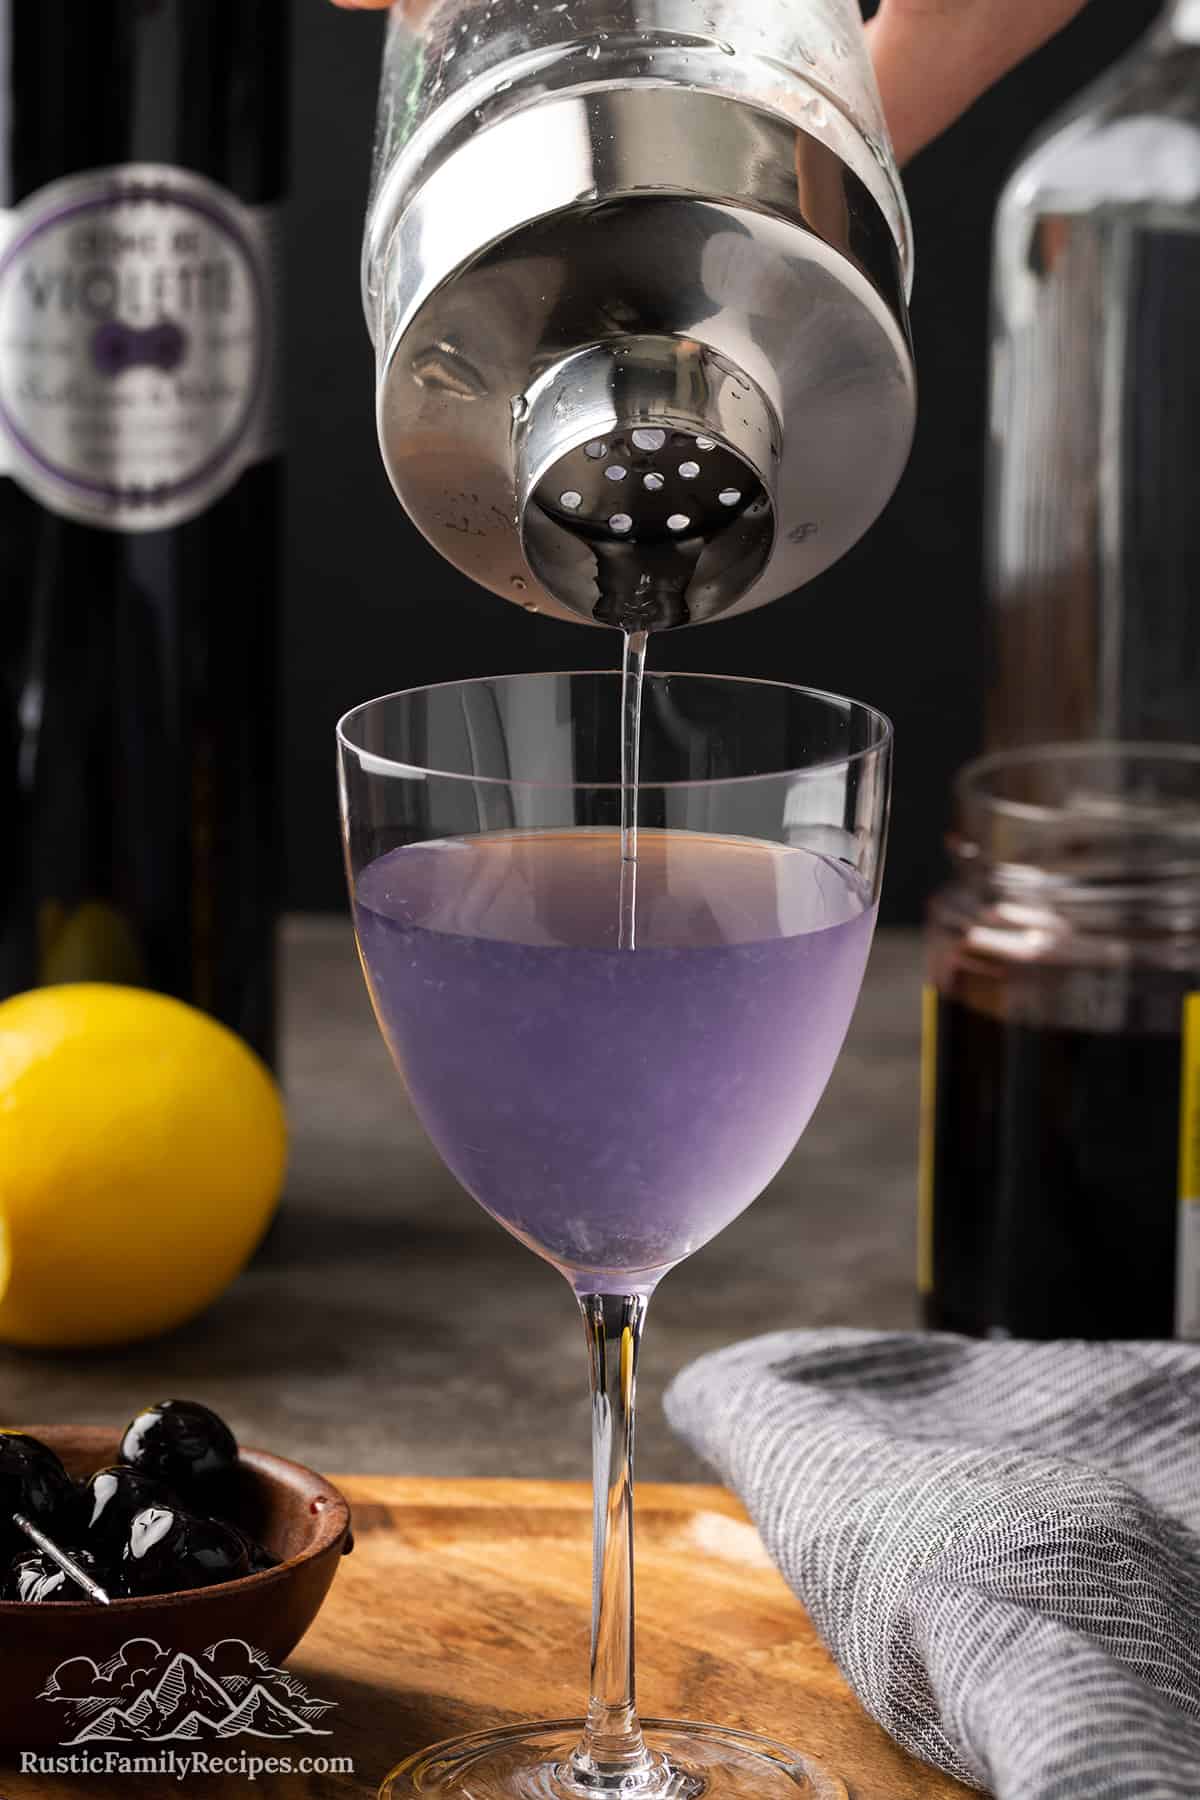 Pouring an Aviation Cocktail from a cocktail shaker into a glass